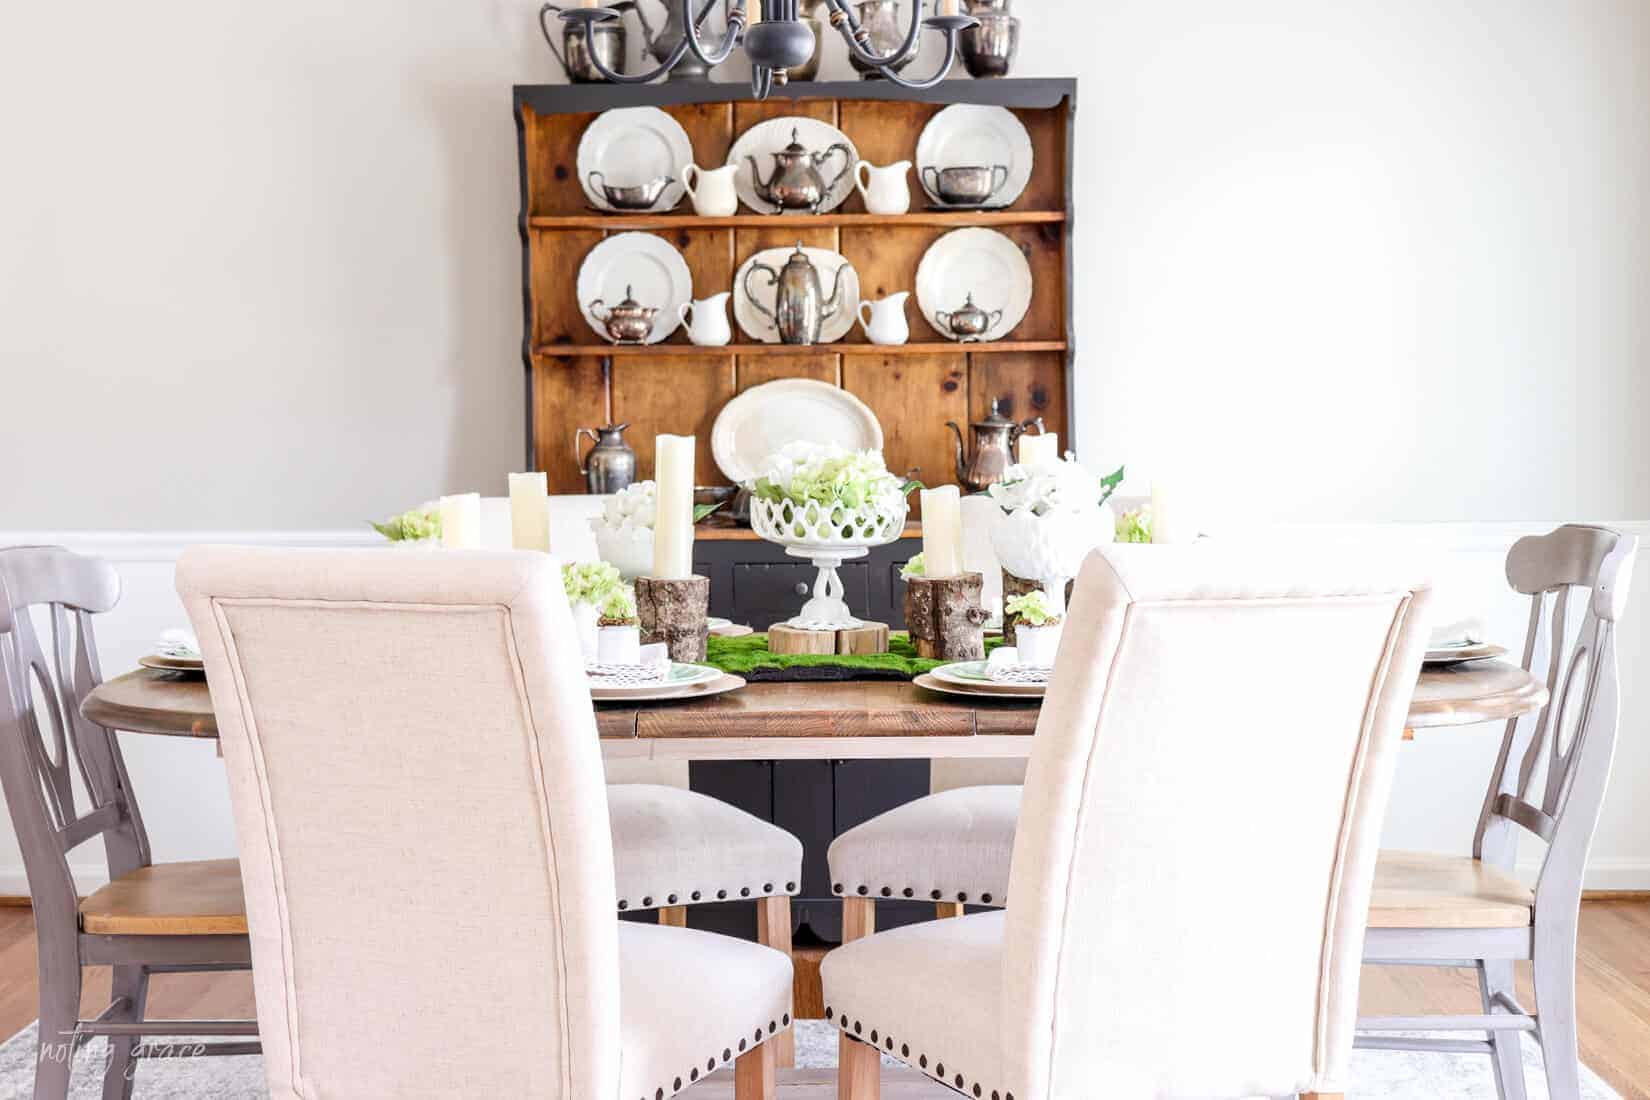 Decorate your Spring Table with MilkGlass and Hydrangeas